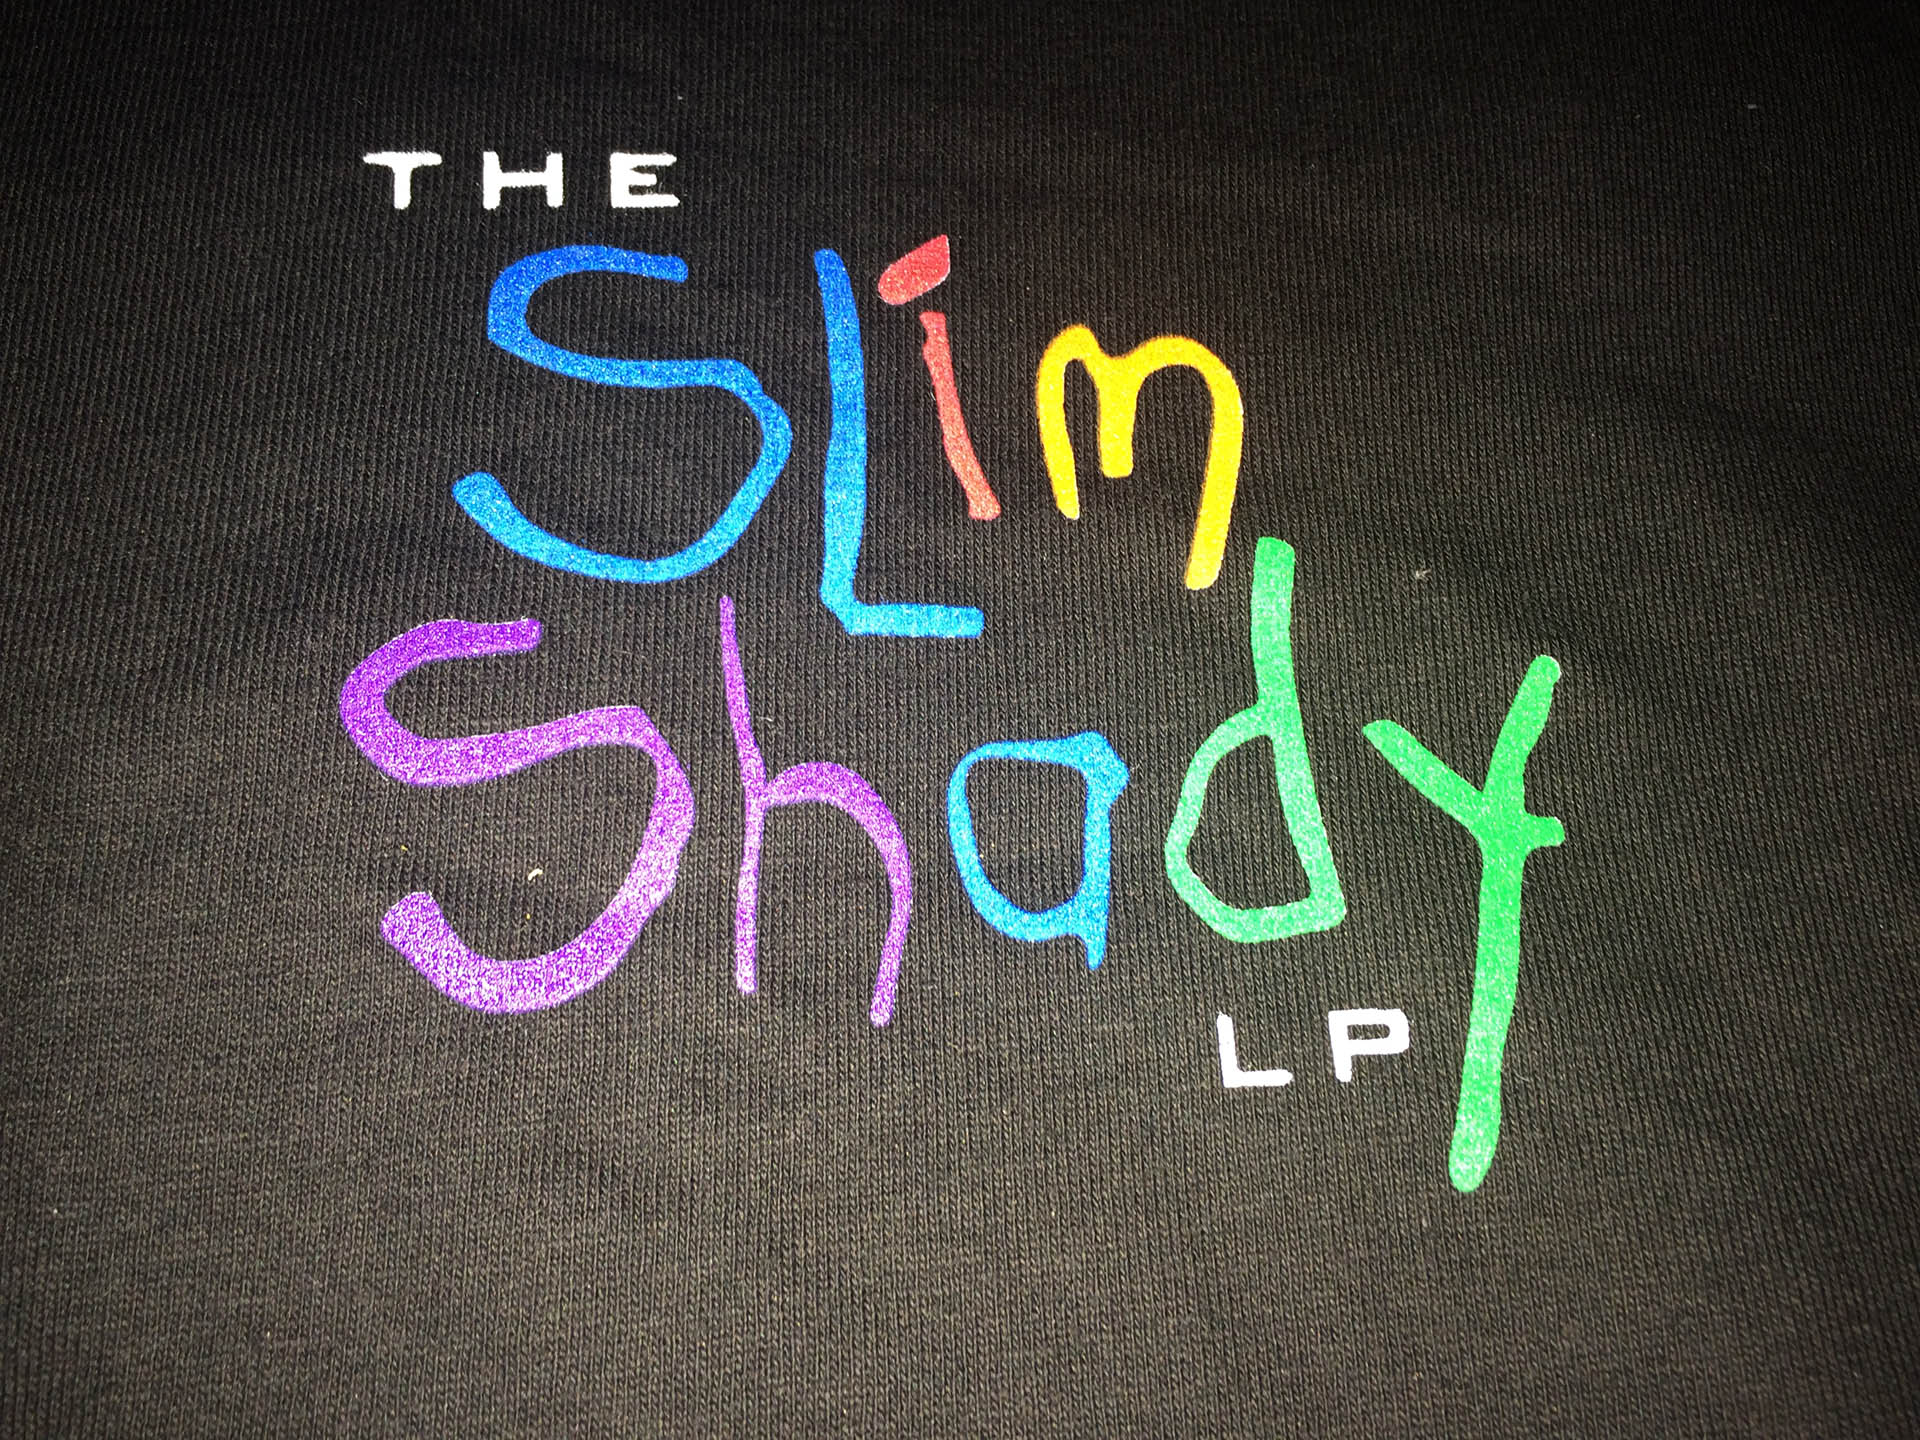 the slim shady lp itunes cover